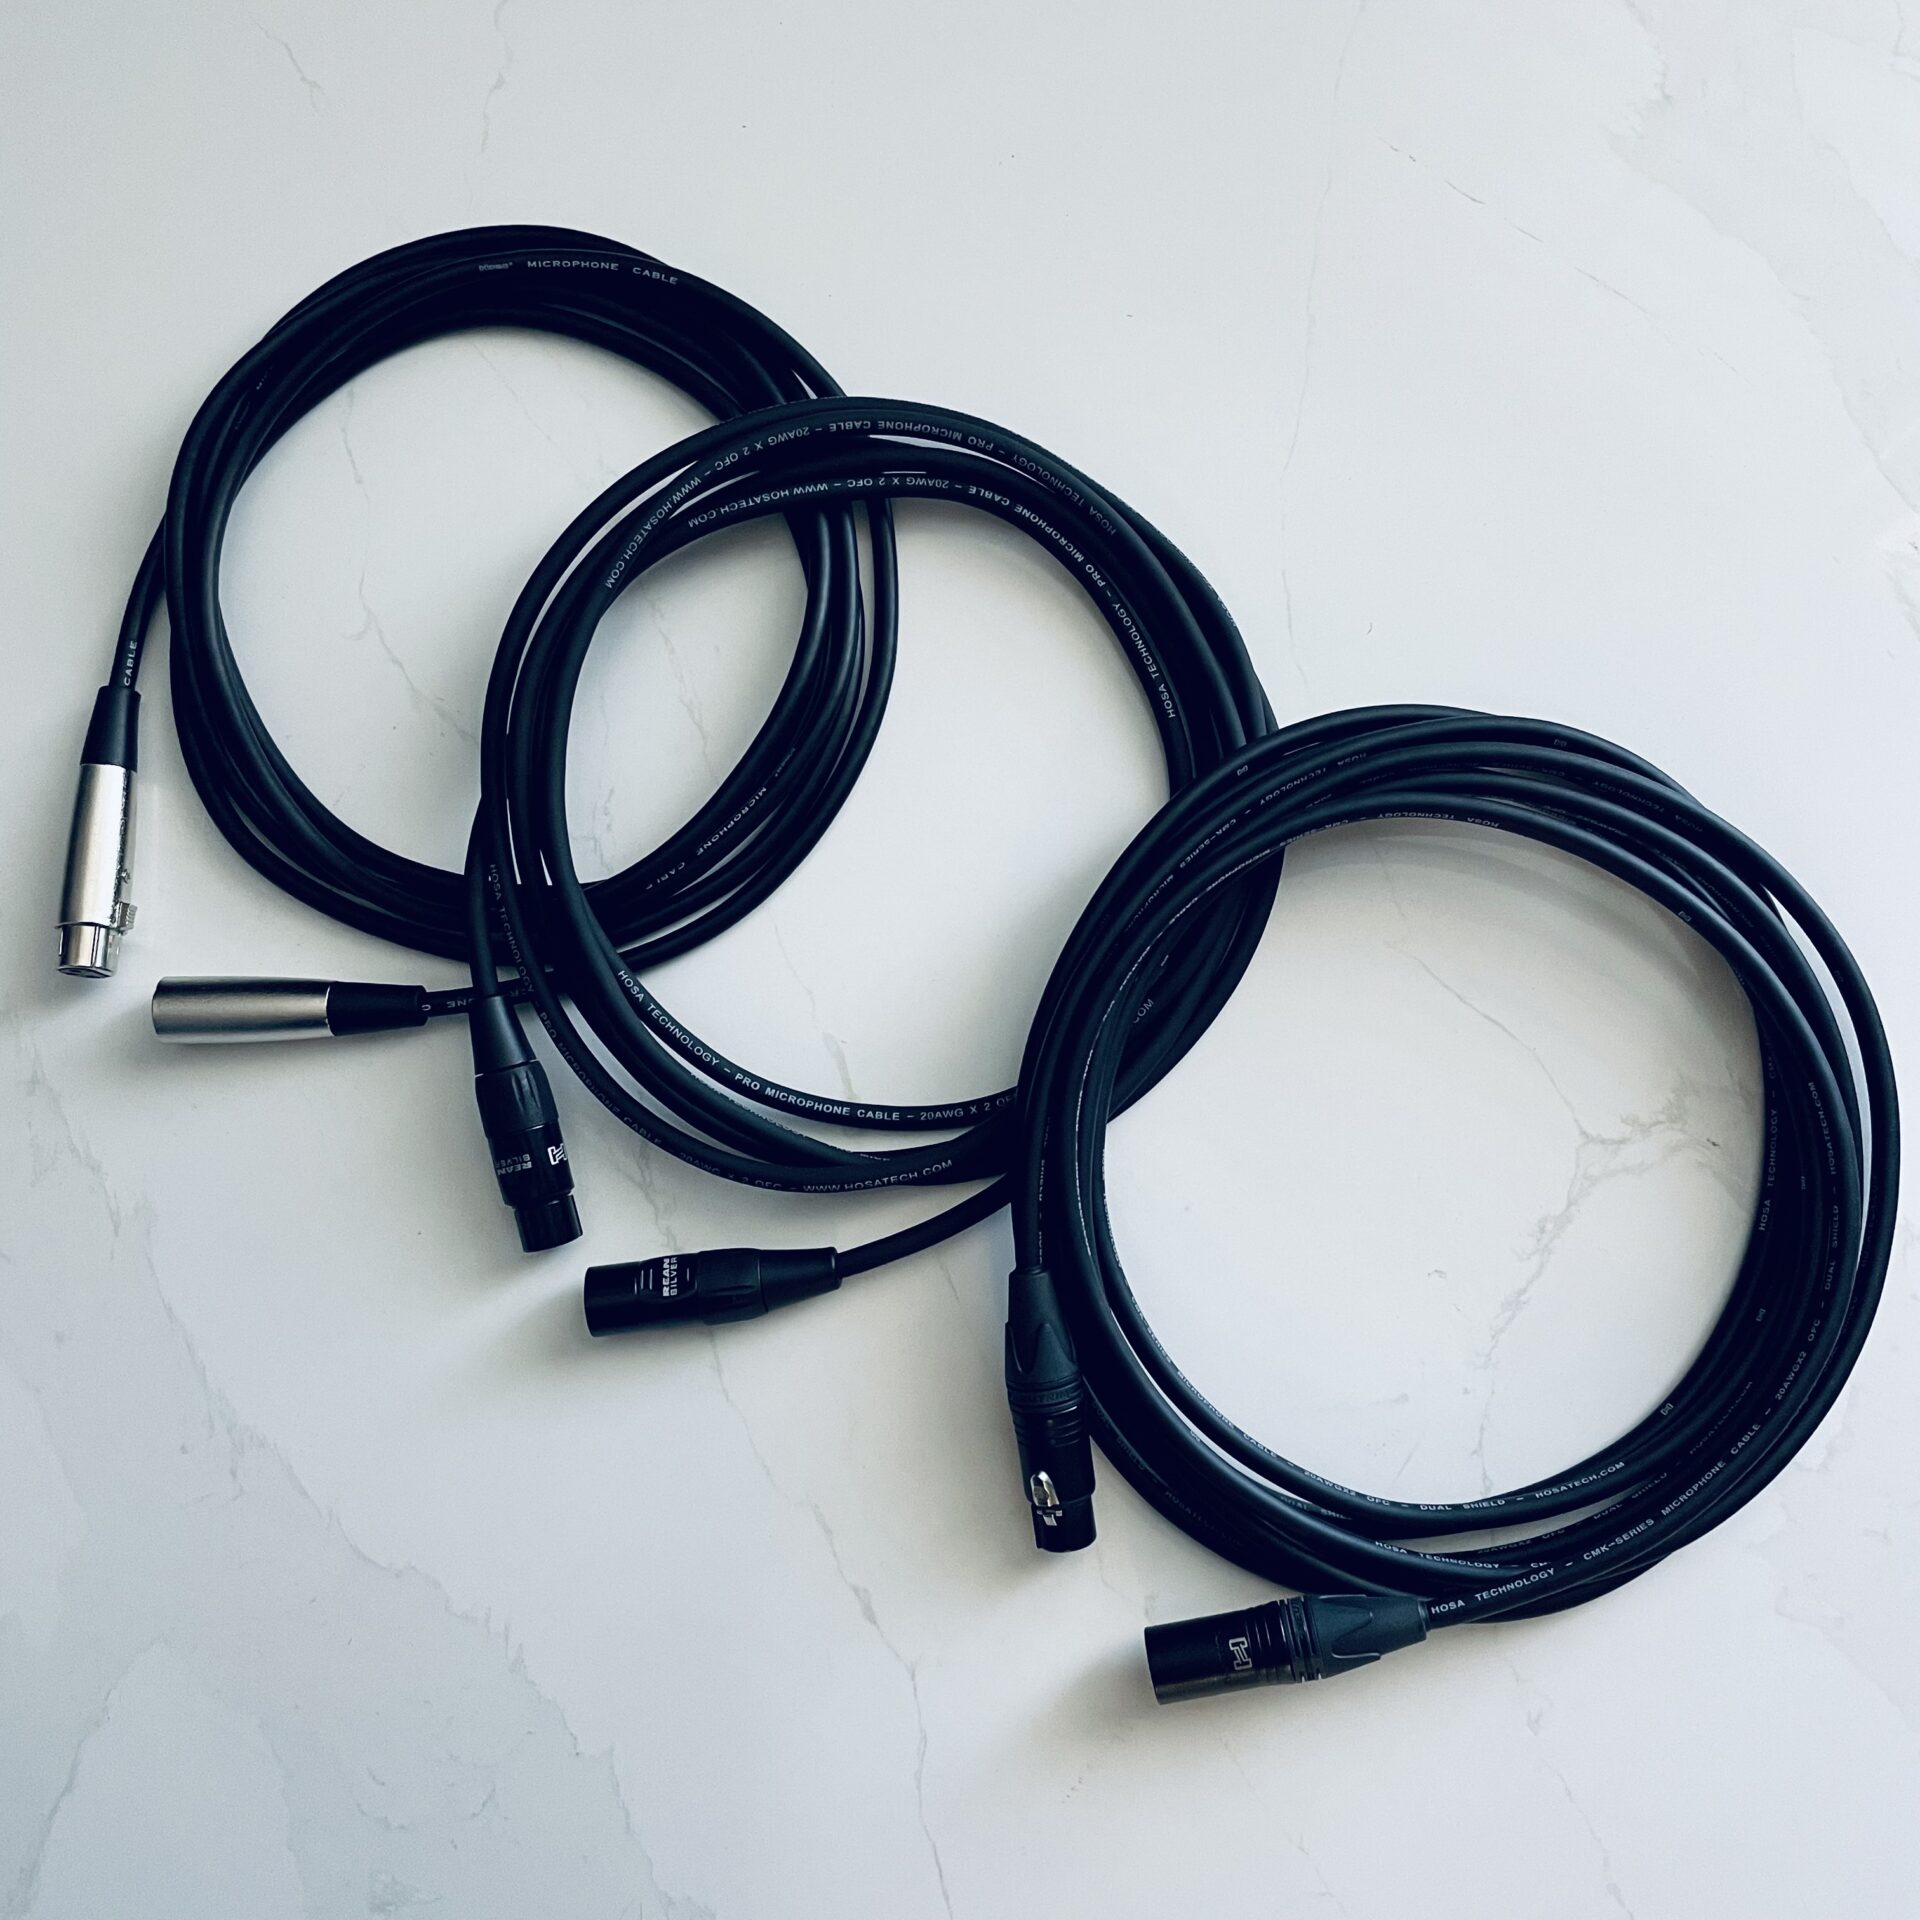 Are More Expensive Cables Worth It?